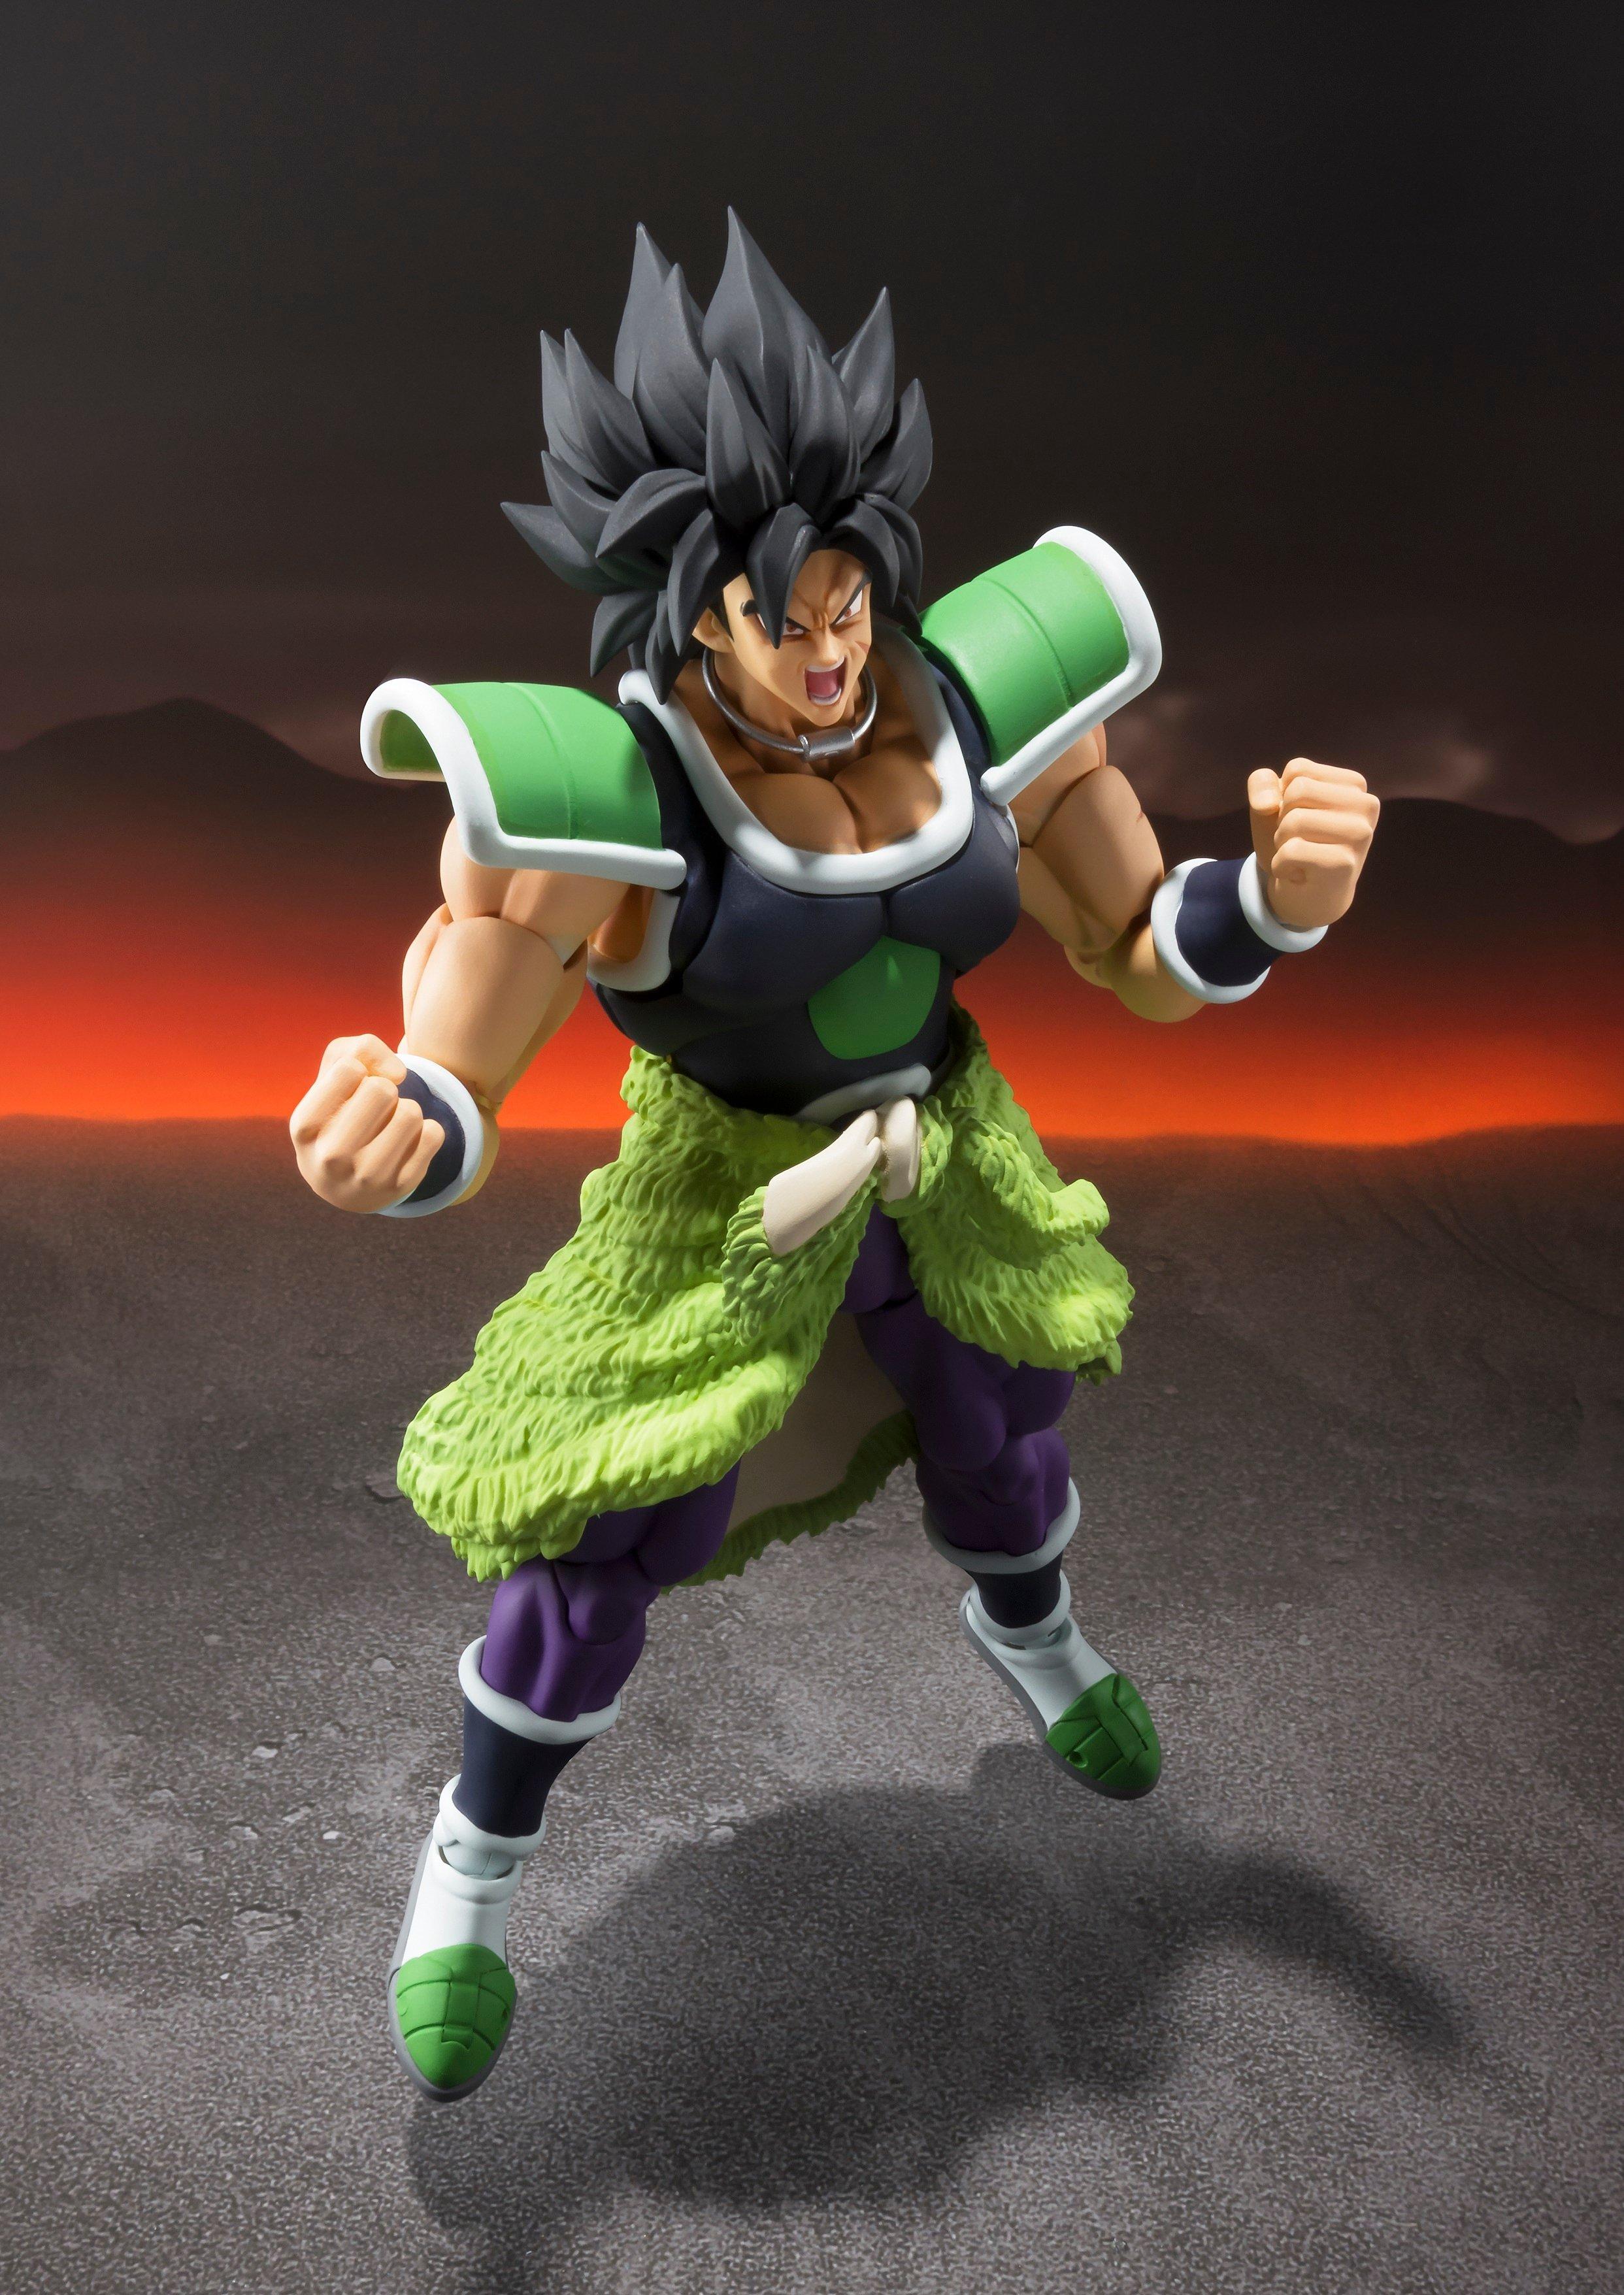 action figure dragon ball super broly